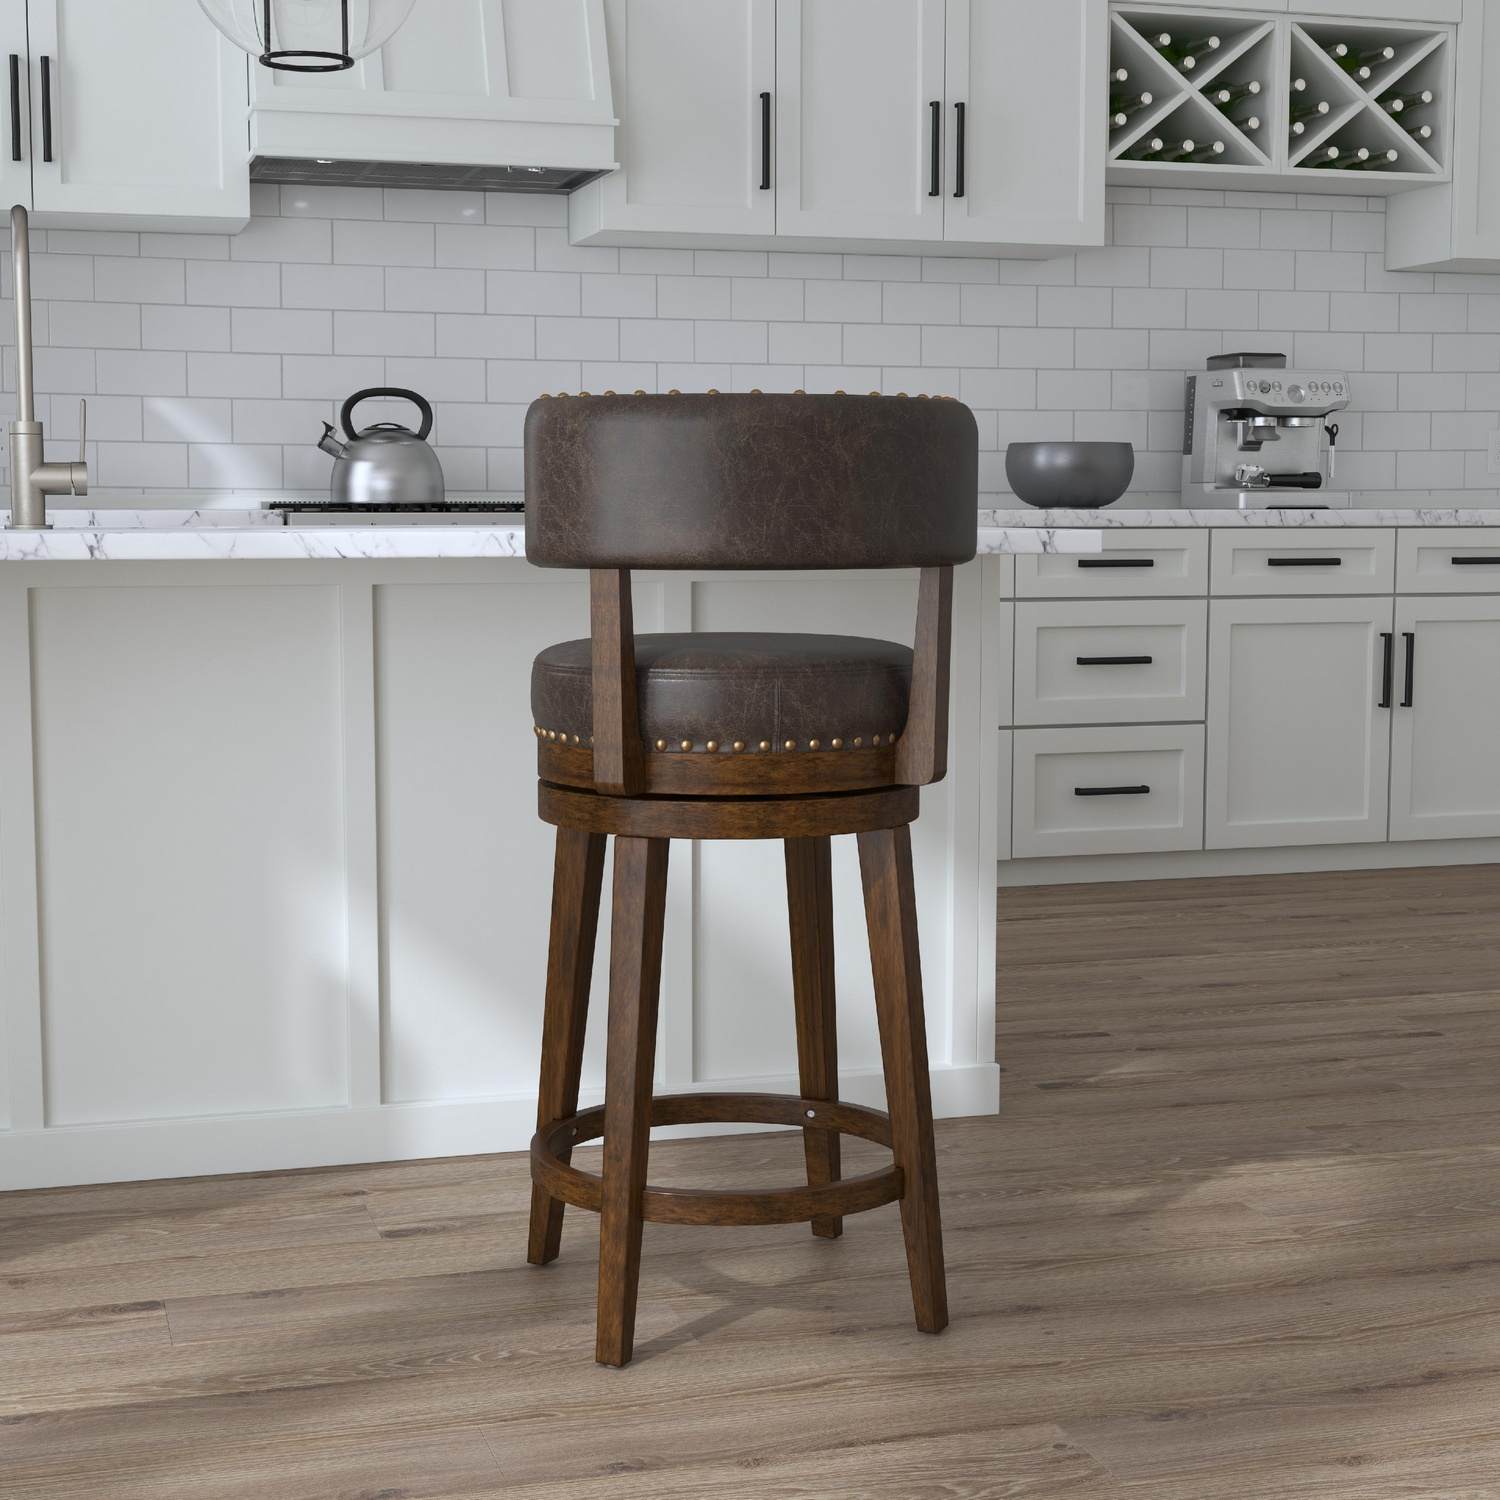 Hillsdale Lawton Wood Counter Height Swivel Stool - Walnut/Aged Brown Faux Leather